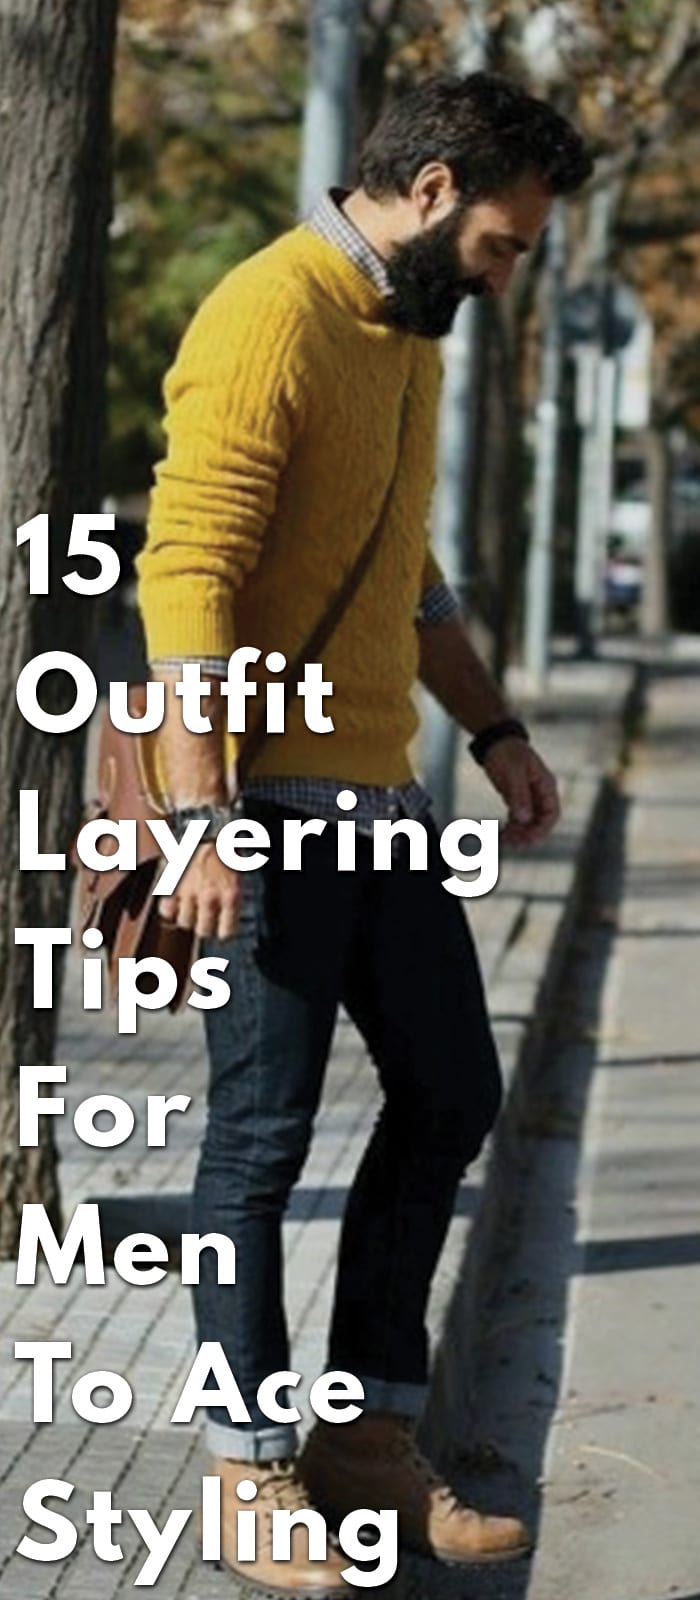 15-Outfit-Layering-Tips-For-Men-To-Ace-Styling.